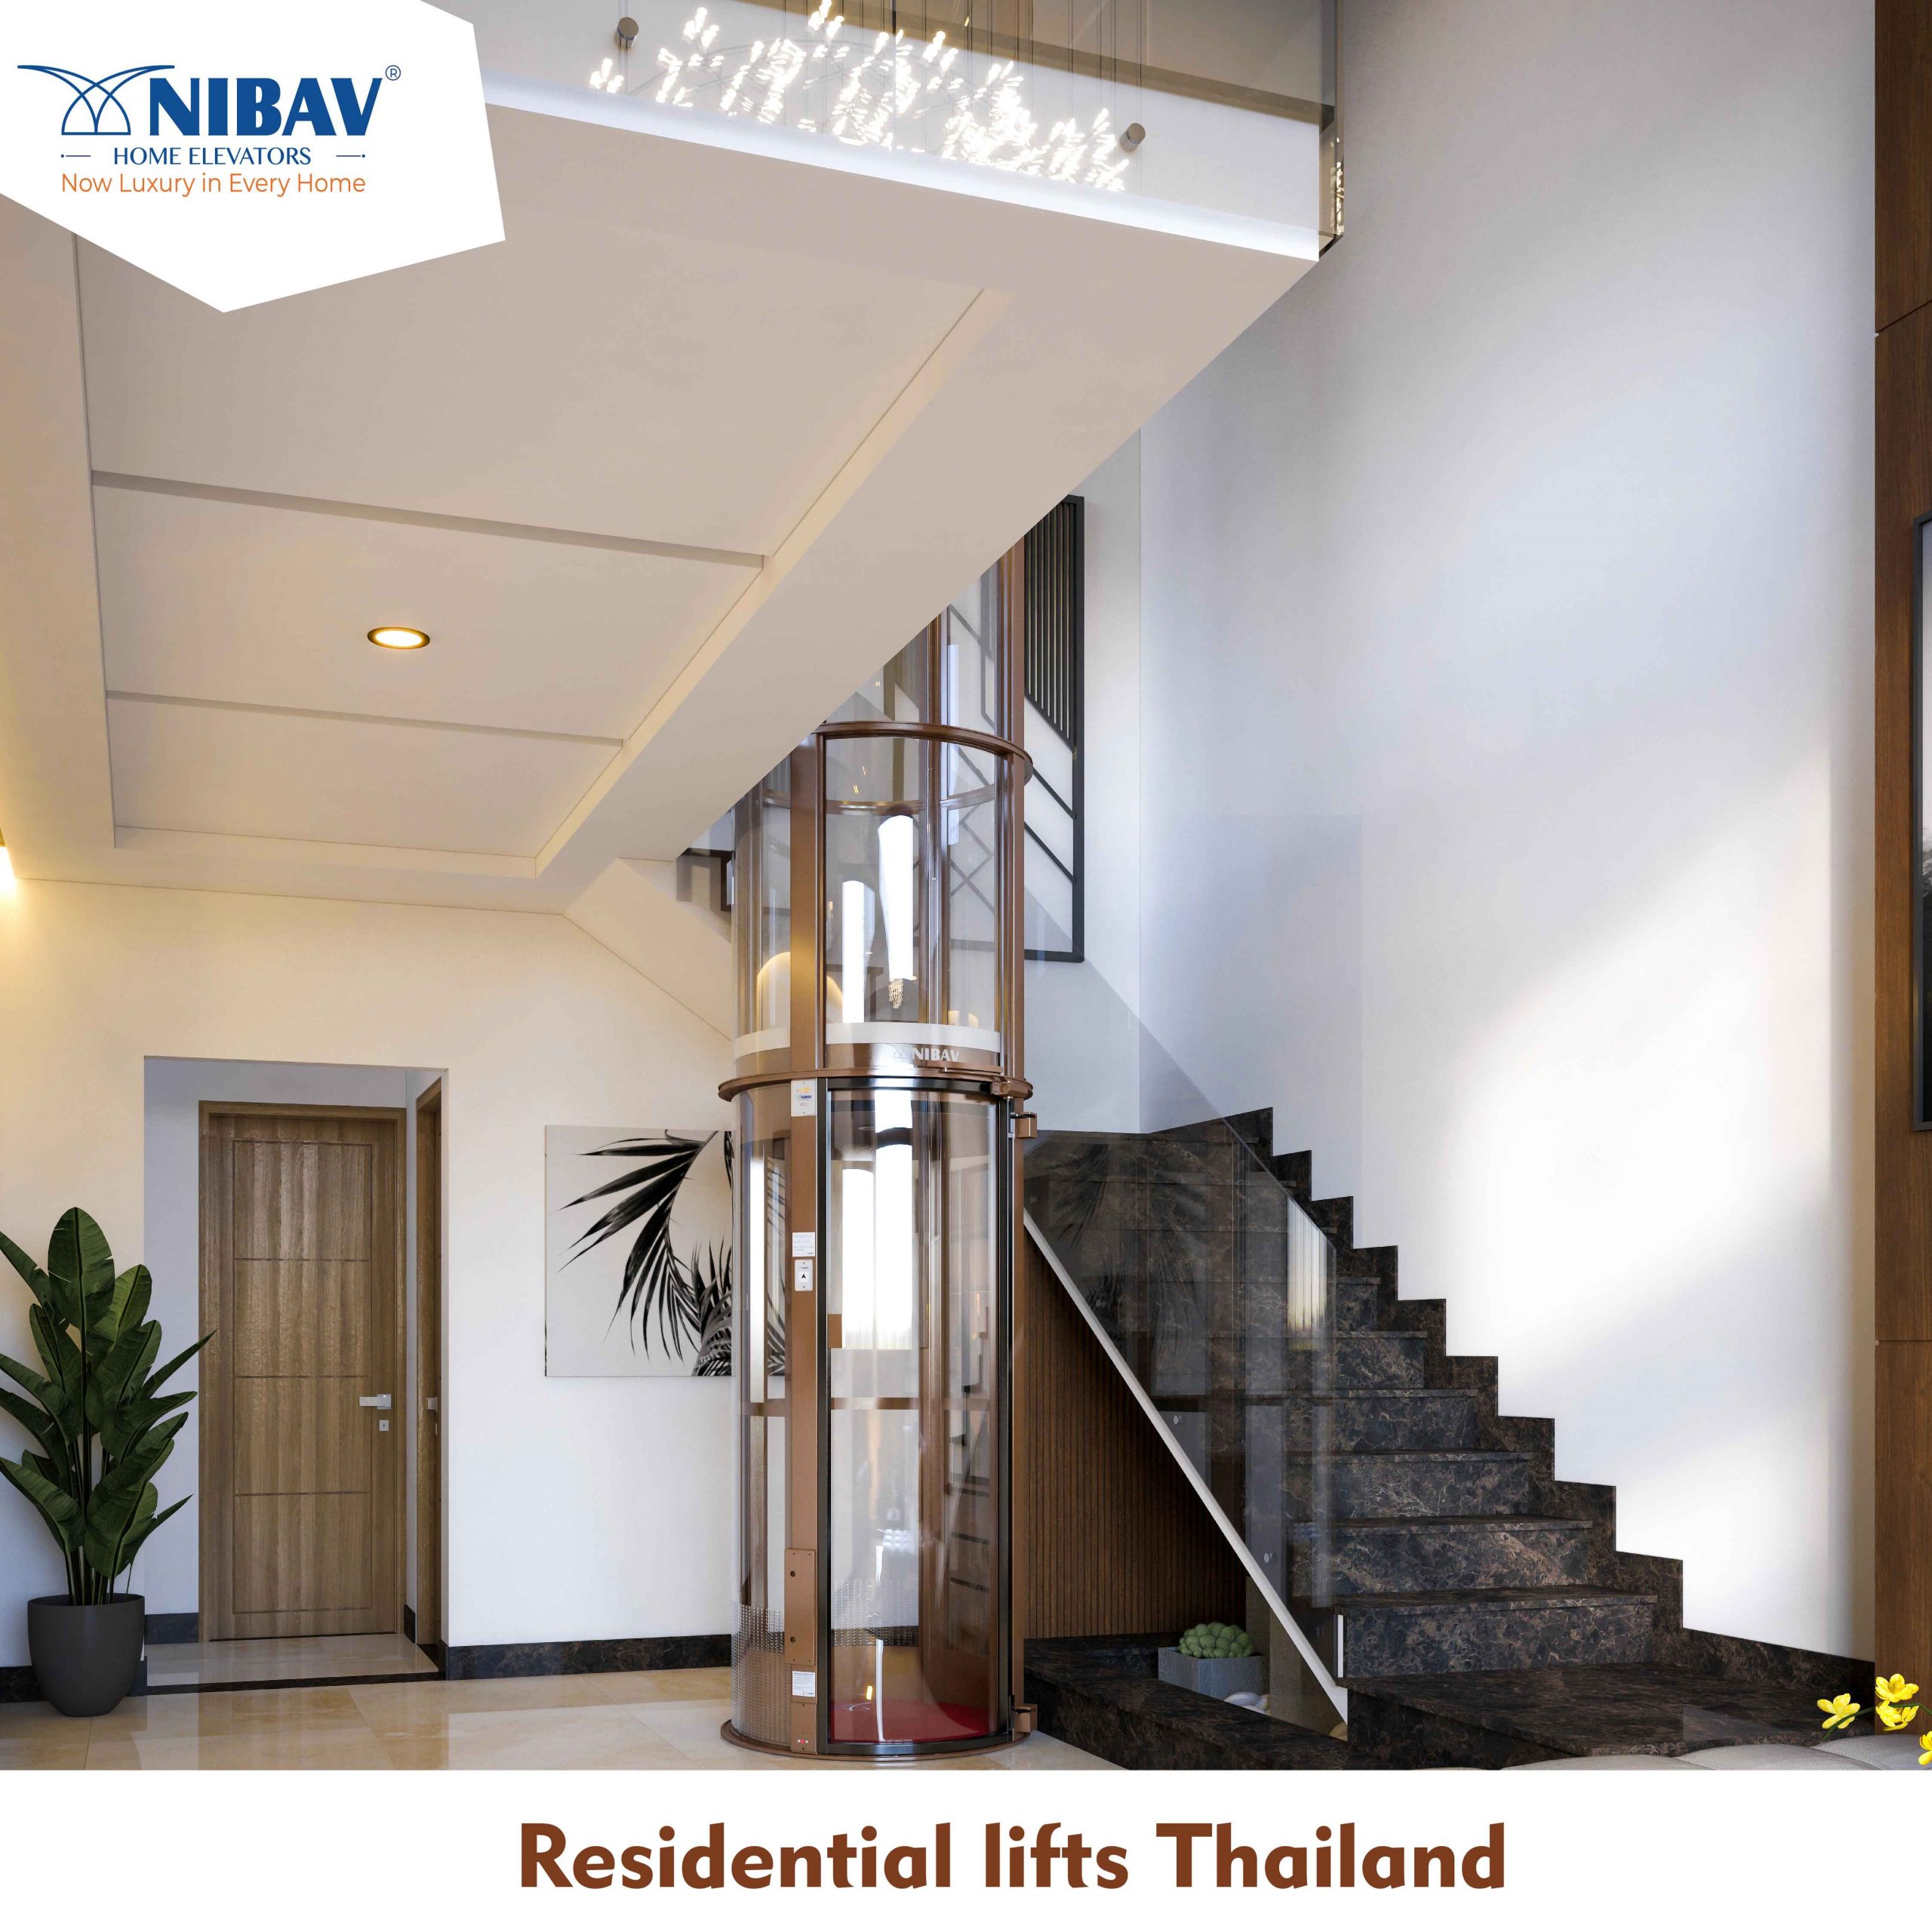 Residential lifts Thailand